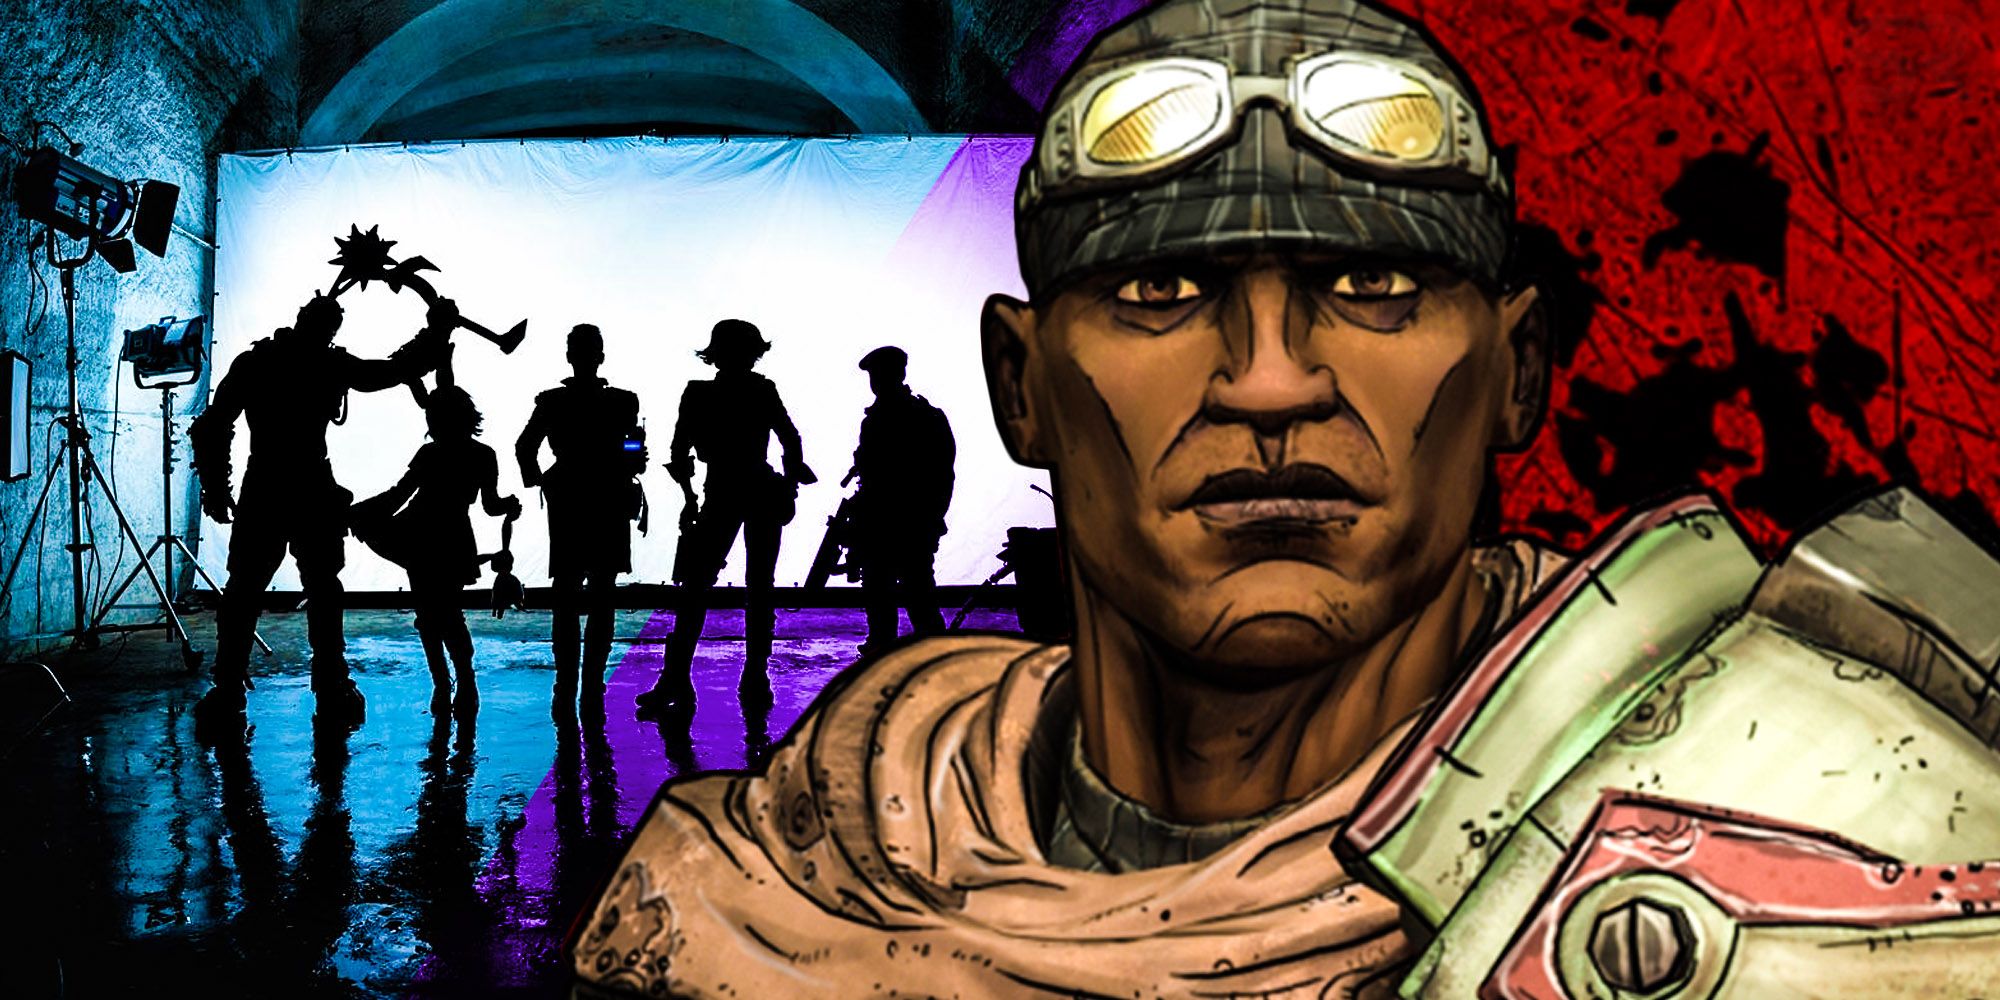 An image of Roland and the characters silhouettes in Borderlands